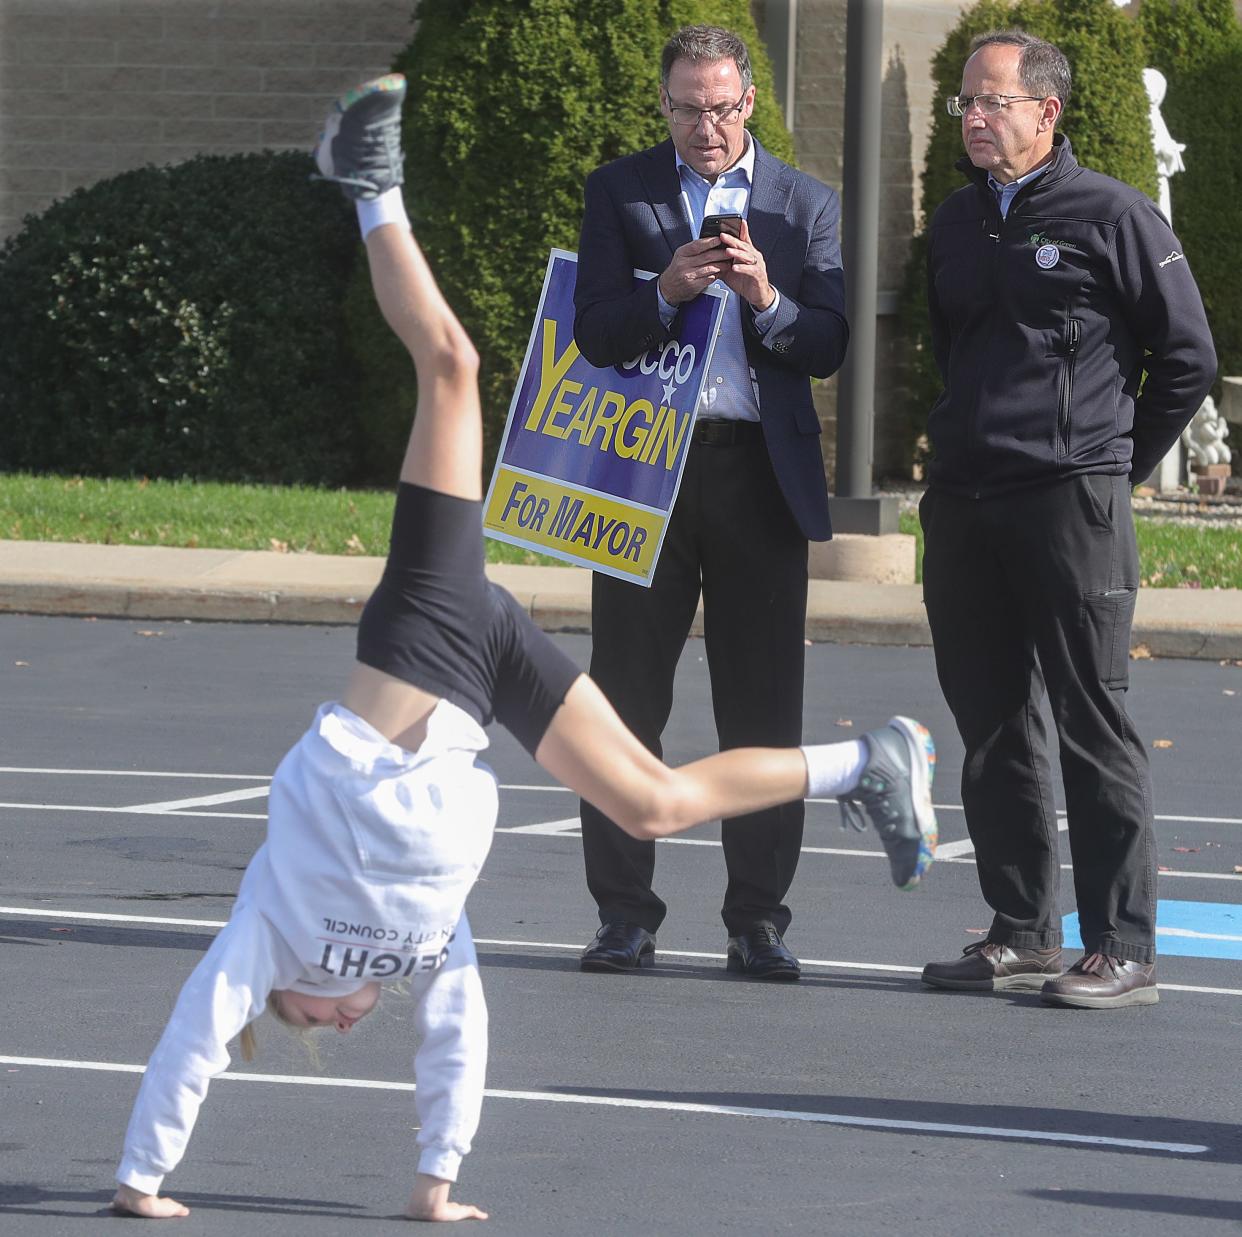 Emma Speight, 9, of Green, does a cartwheel in the parking lot of Queen of Heaven Catholic Church while waiting to talk to voters about her father, City Council candidate Justin Speight, on Tuesday. In the background is mayoral candidate Rocco Yeargin and current Green Mayor Gerard Neugebauer, who is a City Council candidate.